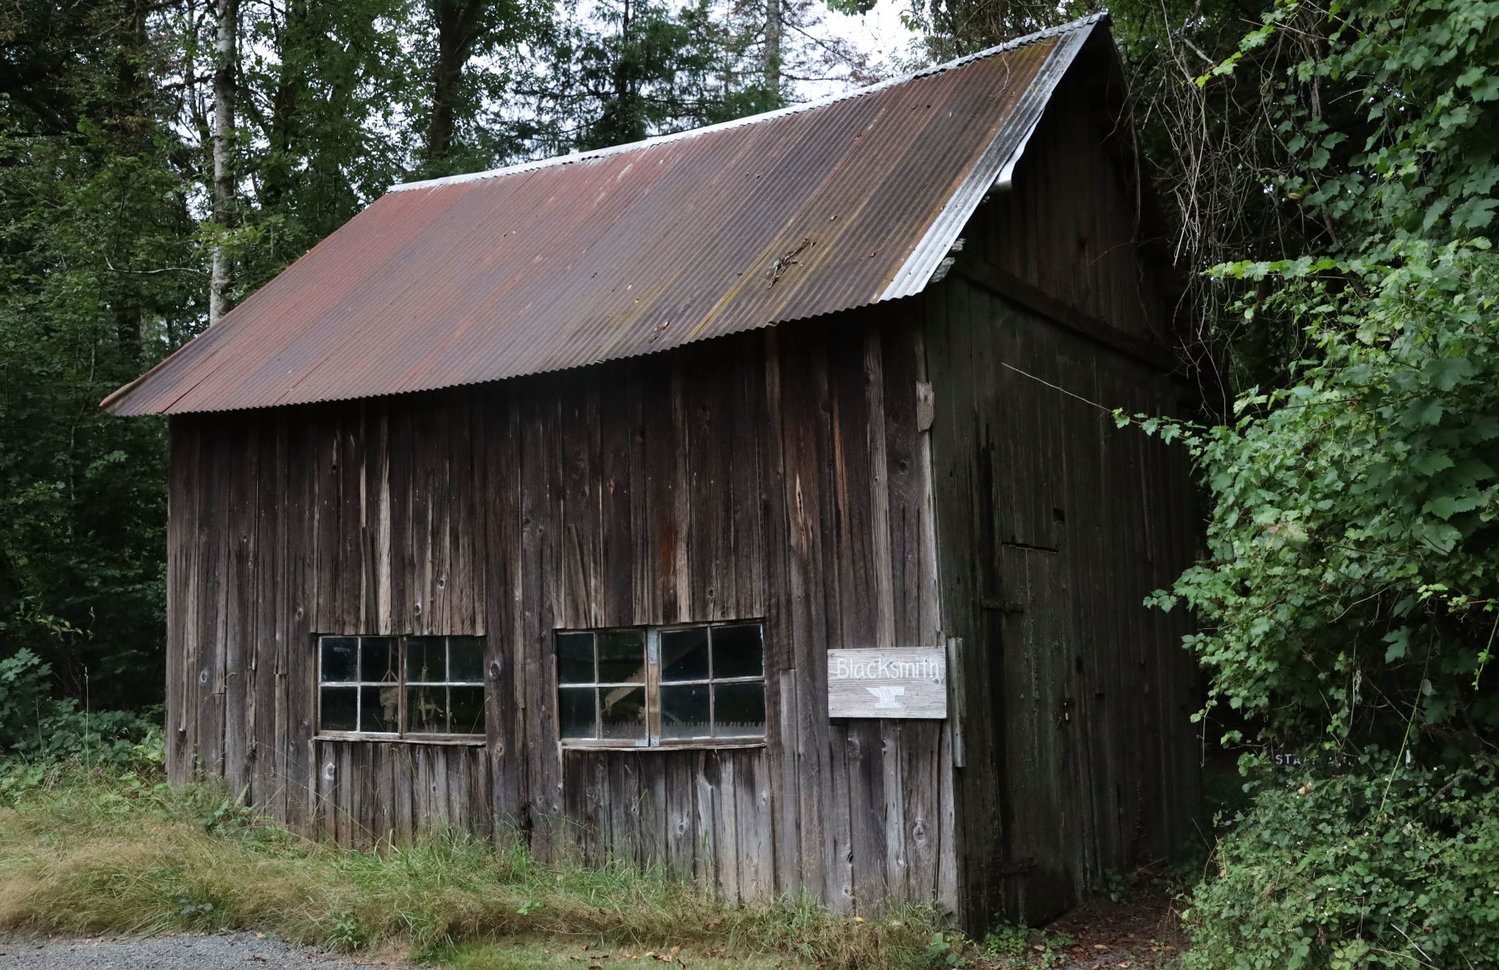 The Pomeroy Farm blacksmith shop, one of several historic buildings located at the farm